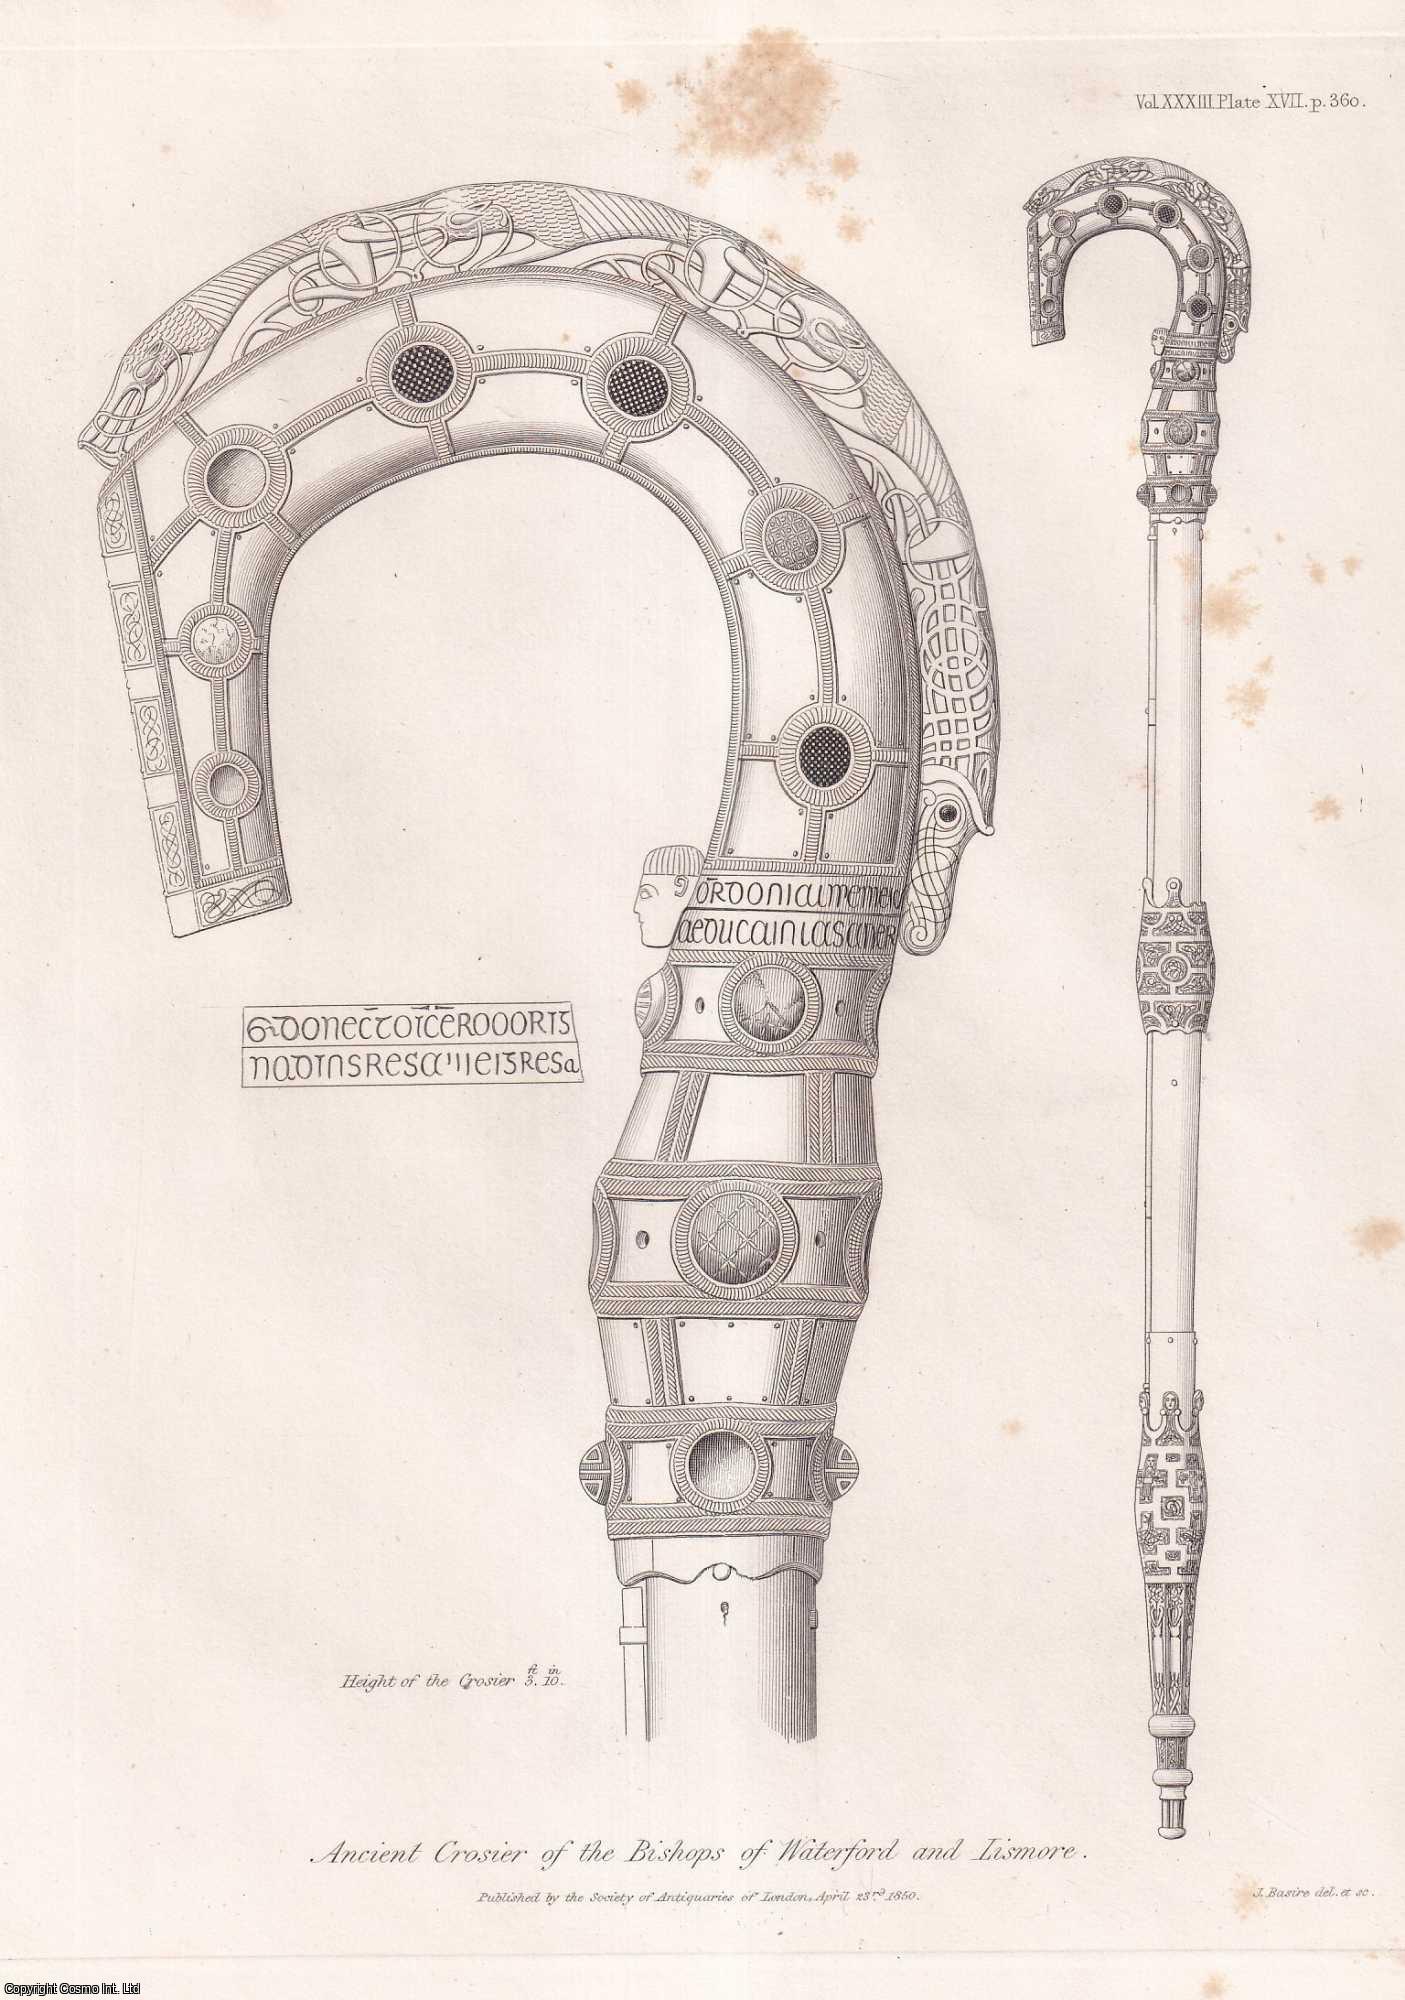 J. PAYNE COLLIER - Note on the ancient Crosier of the Bishops of Waterford and Lismore, the property of the Duke of Devonshire. A rare original article from the journal Archaeologia, 1849.